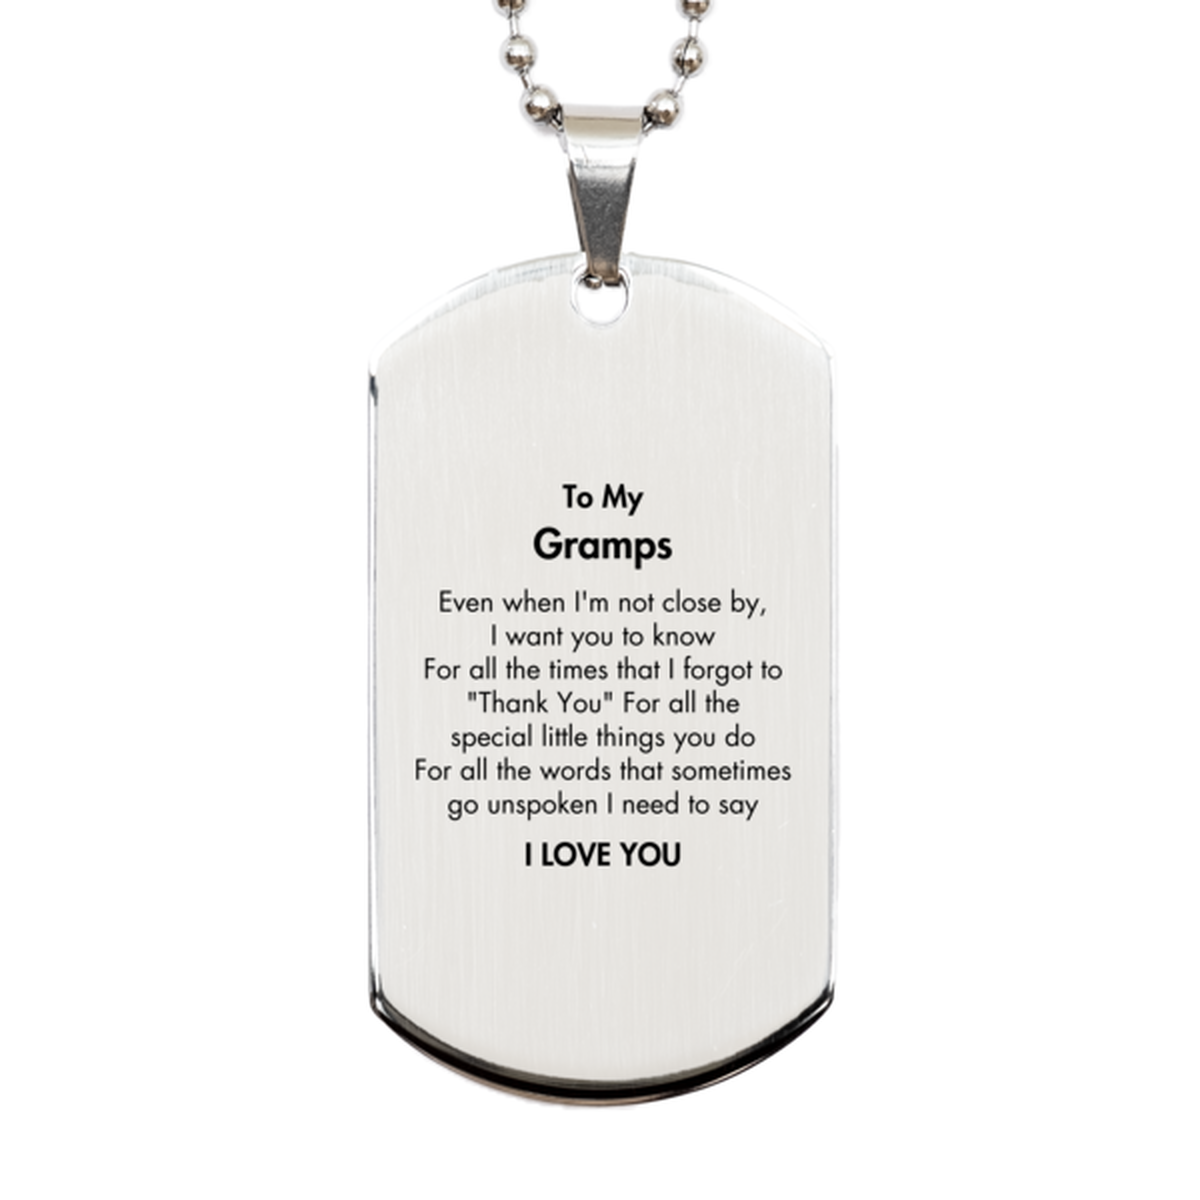 Thank You Gifts for Gramps, Keepsake Silver Dog Tag Gifts for Gramps Birthday Mother's day Father's Day Gramps For all the words That sometimes go unspoken I need to say I LOVE YOU